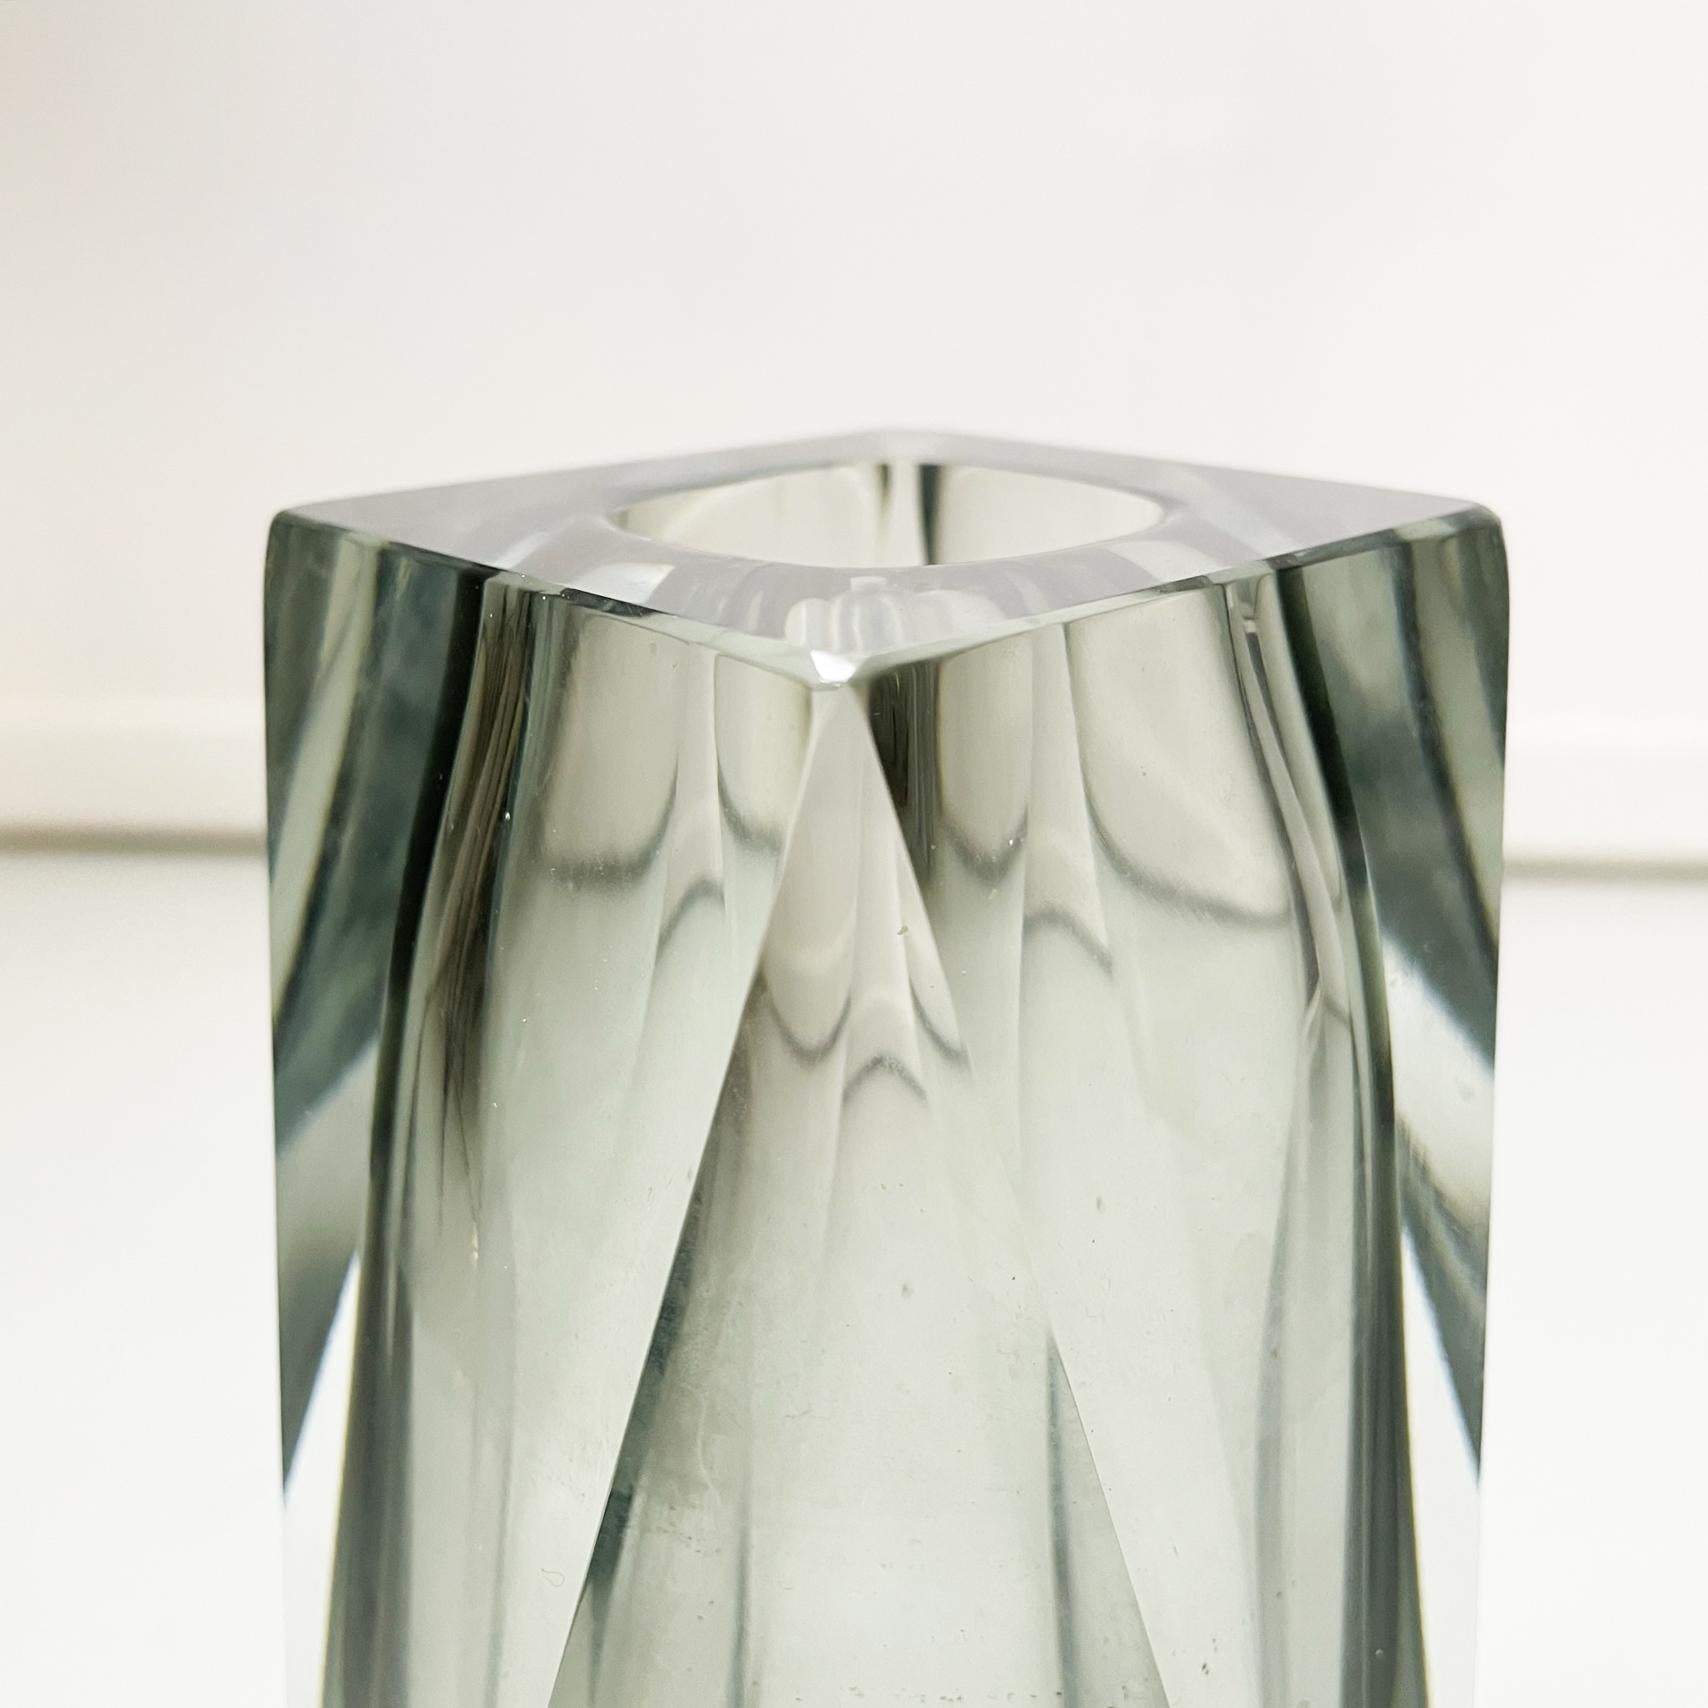 Italian Modern Vase in Grey Murano Glass from the I Sommersi Series, 1970s For Sale 2